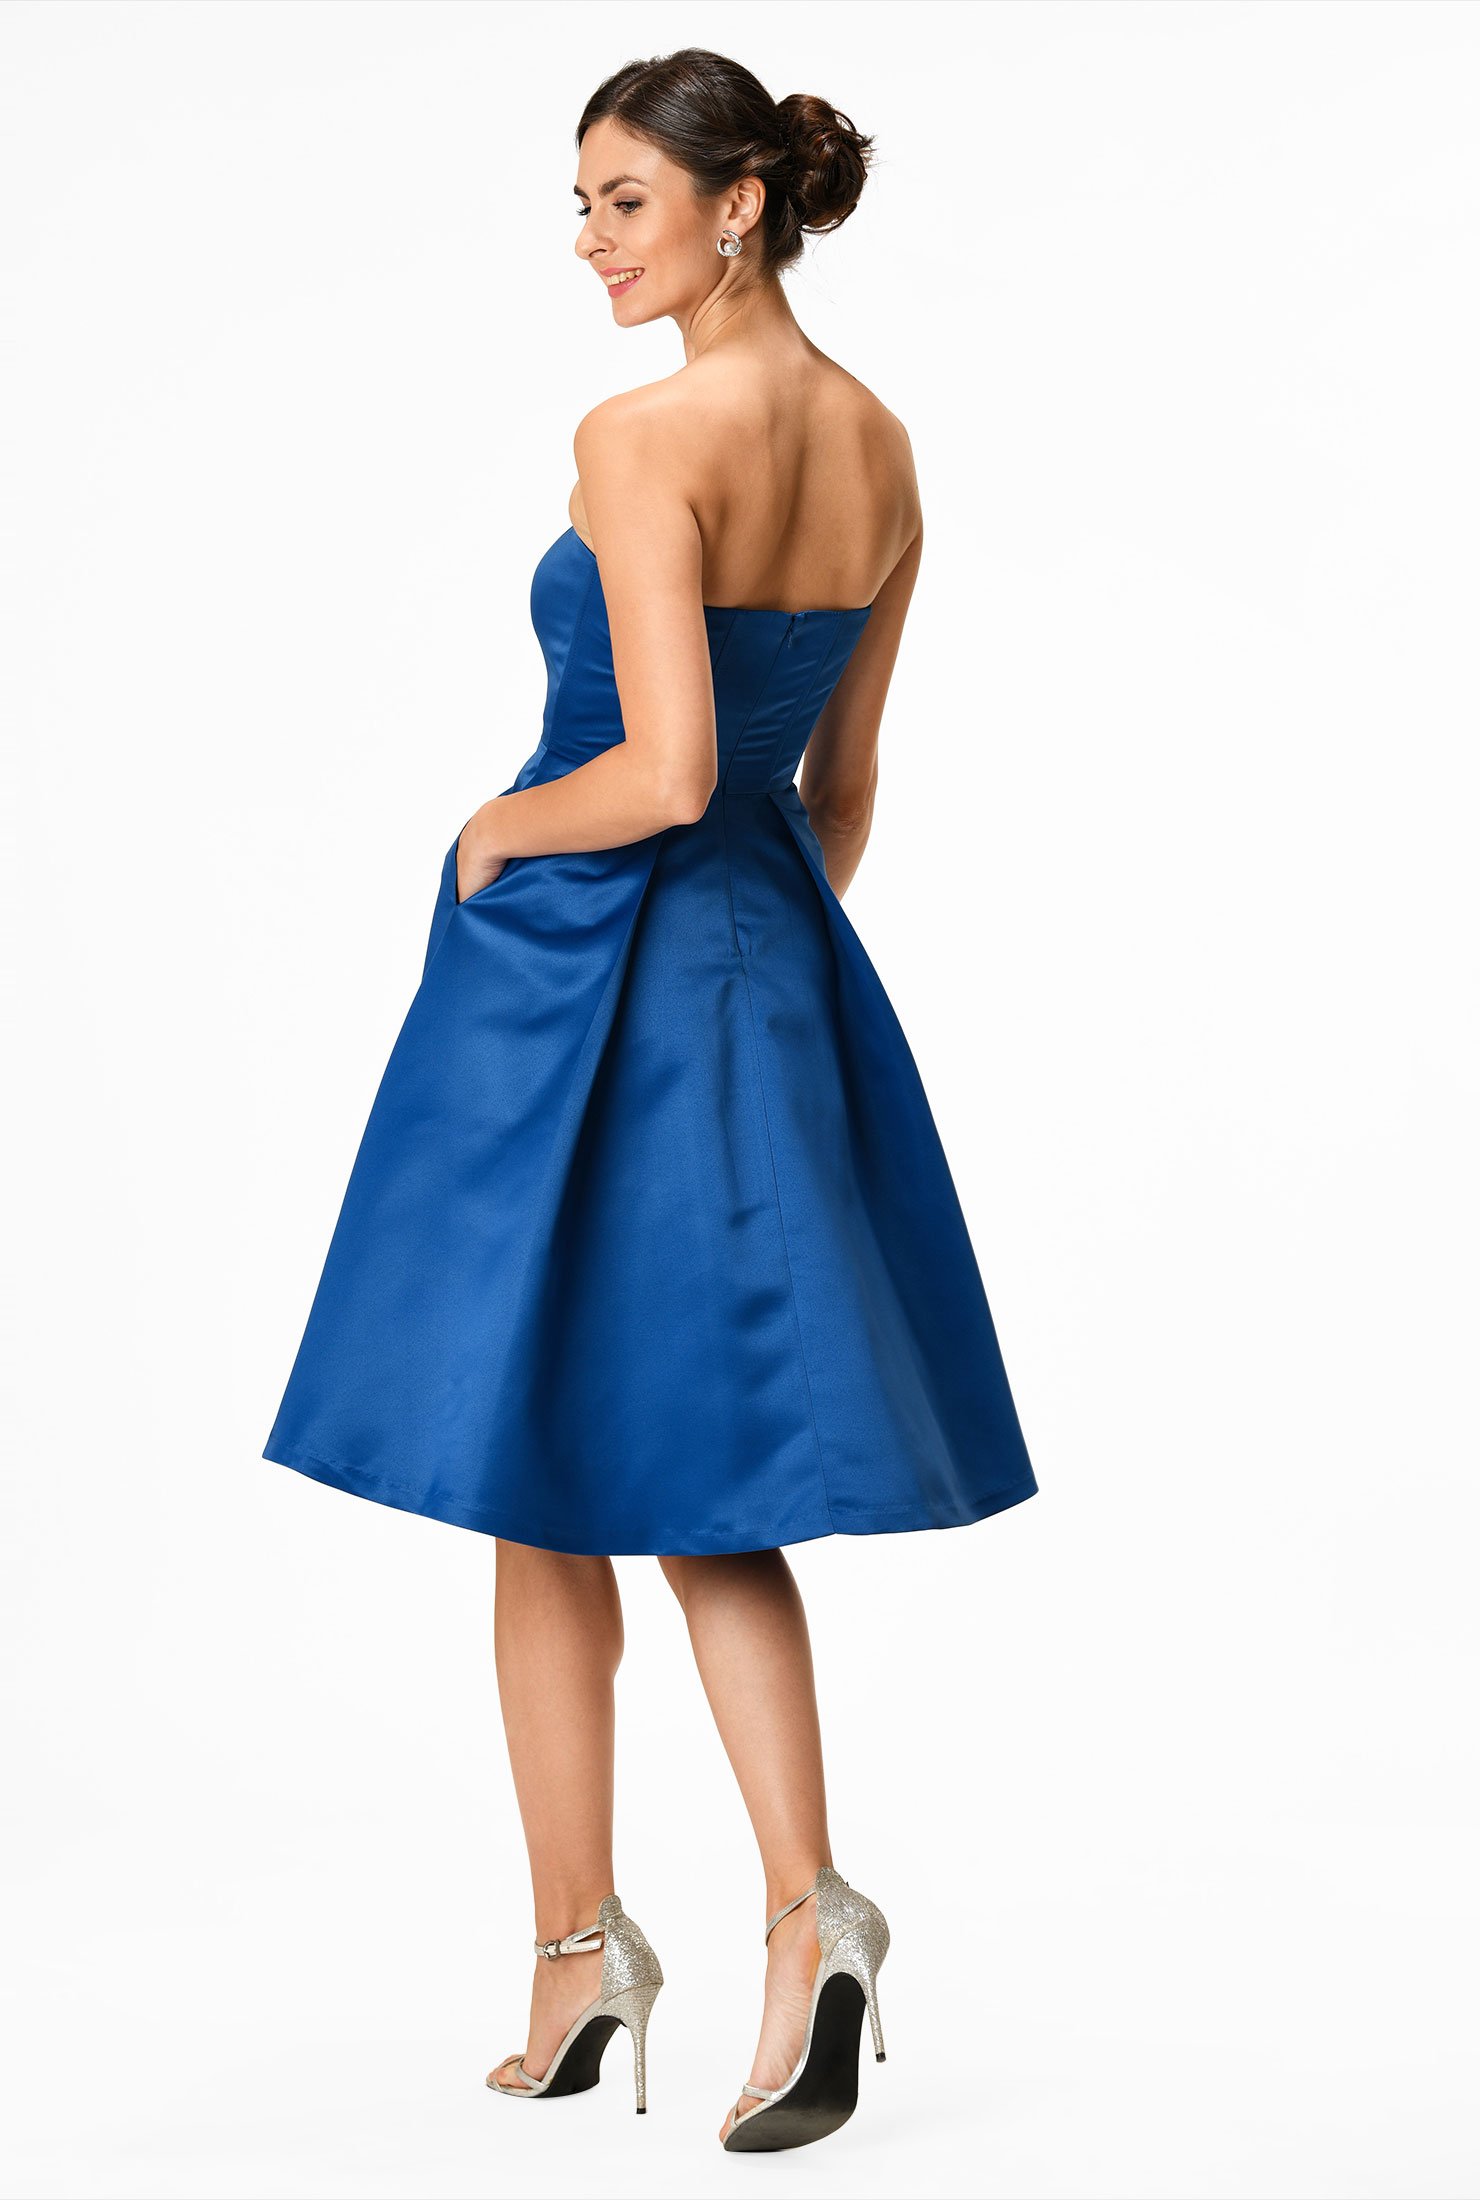 Our polydupioni dress is styled with a strapless bodice and flared out to a full skirt with asymmetric angled pleats.